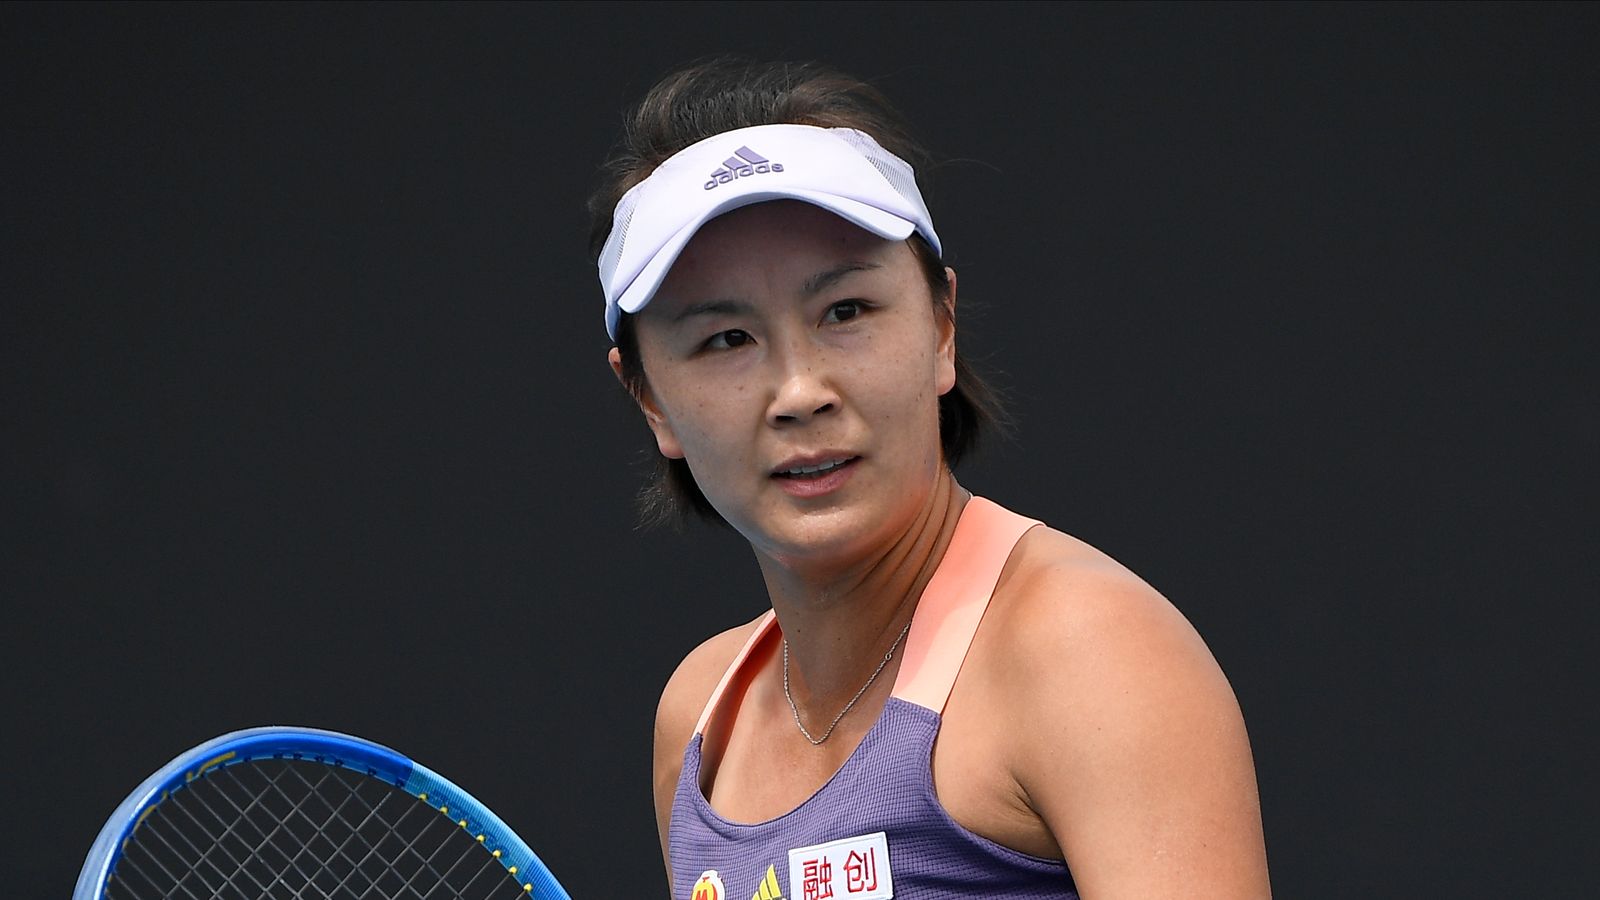 Peng Shuai: Martina Navratilova criticises Australian Open organisers for preventing fans wearing shirts in support of Chinese player - Sky Sports